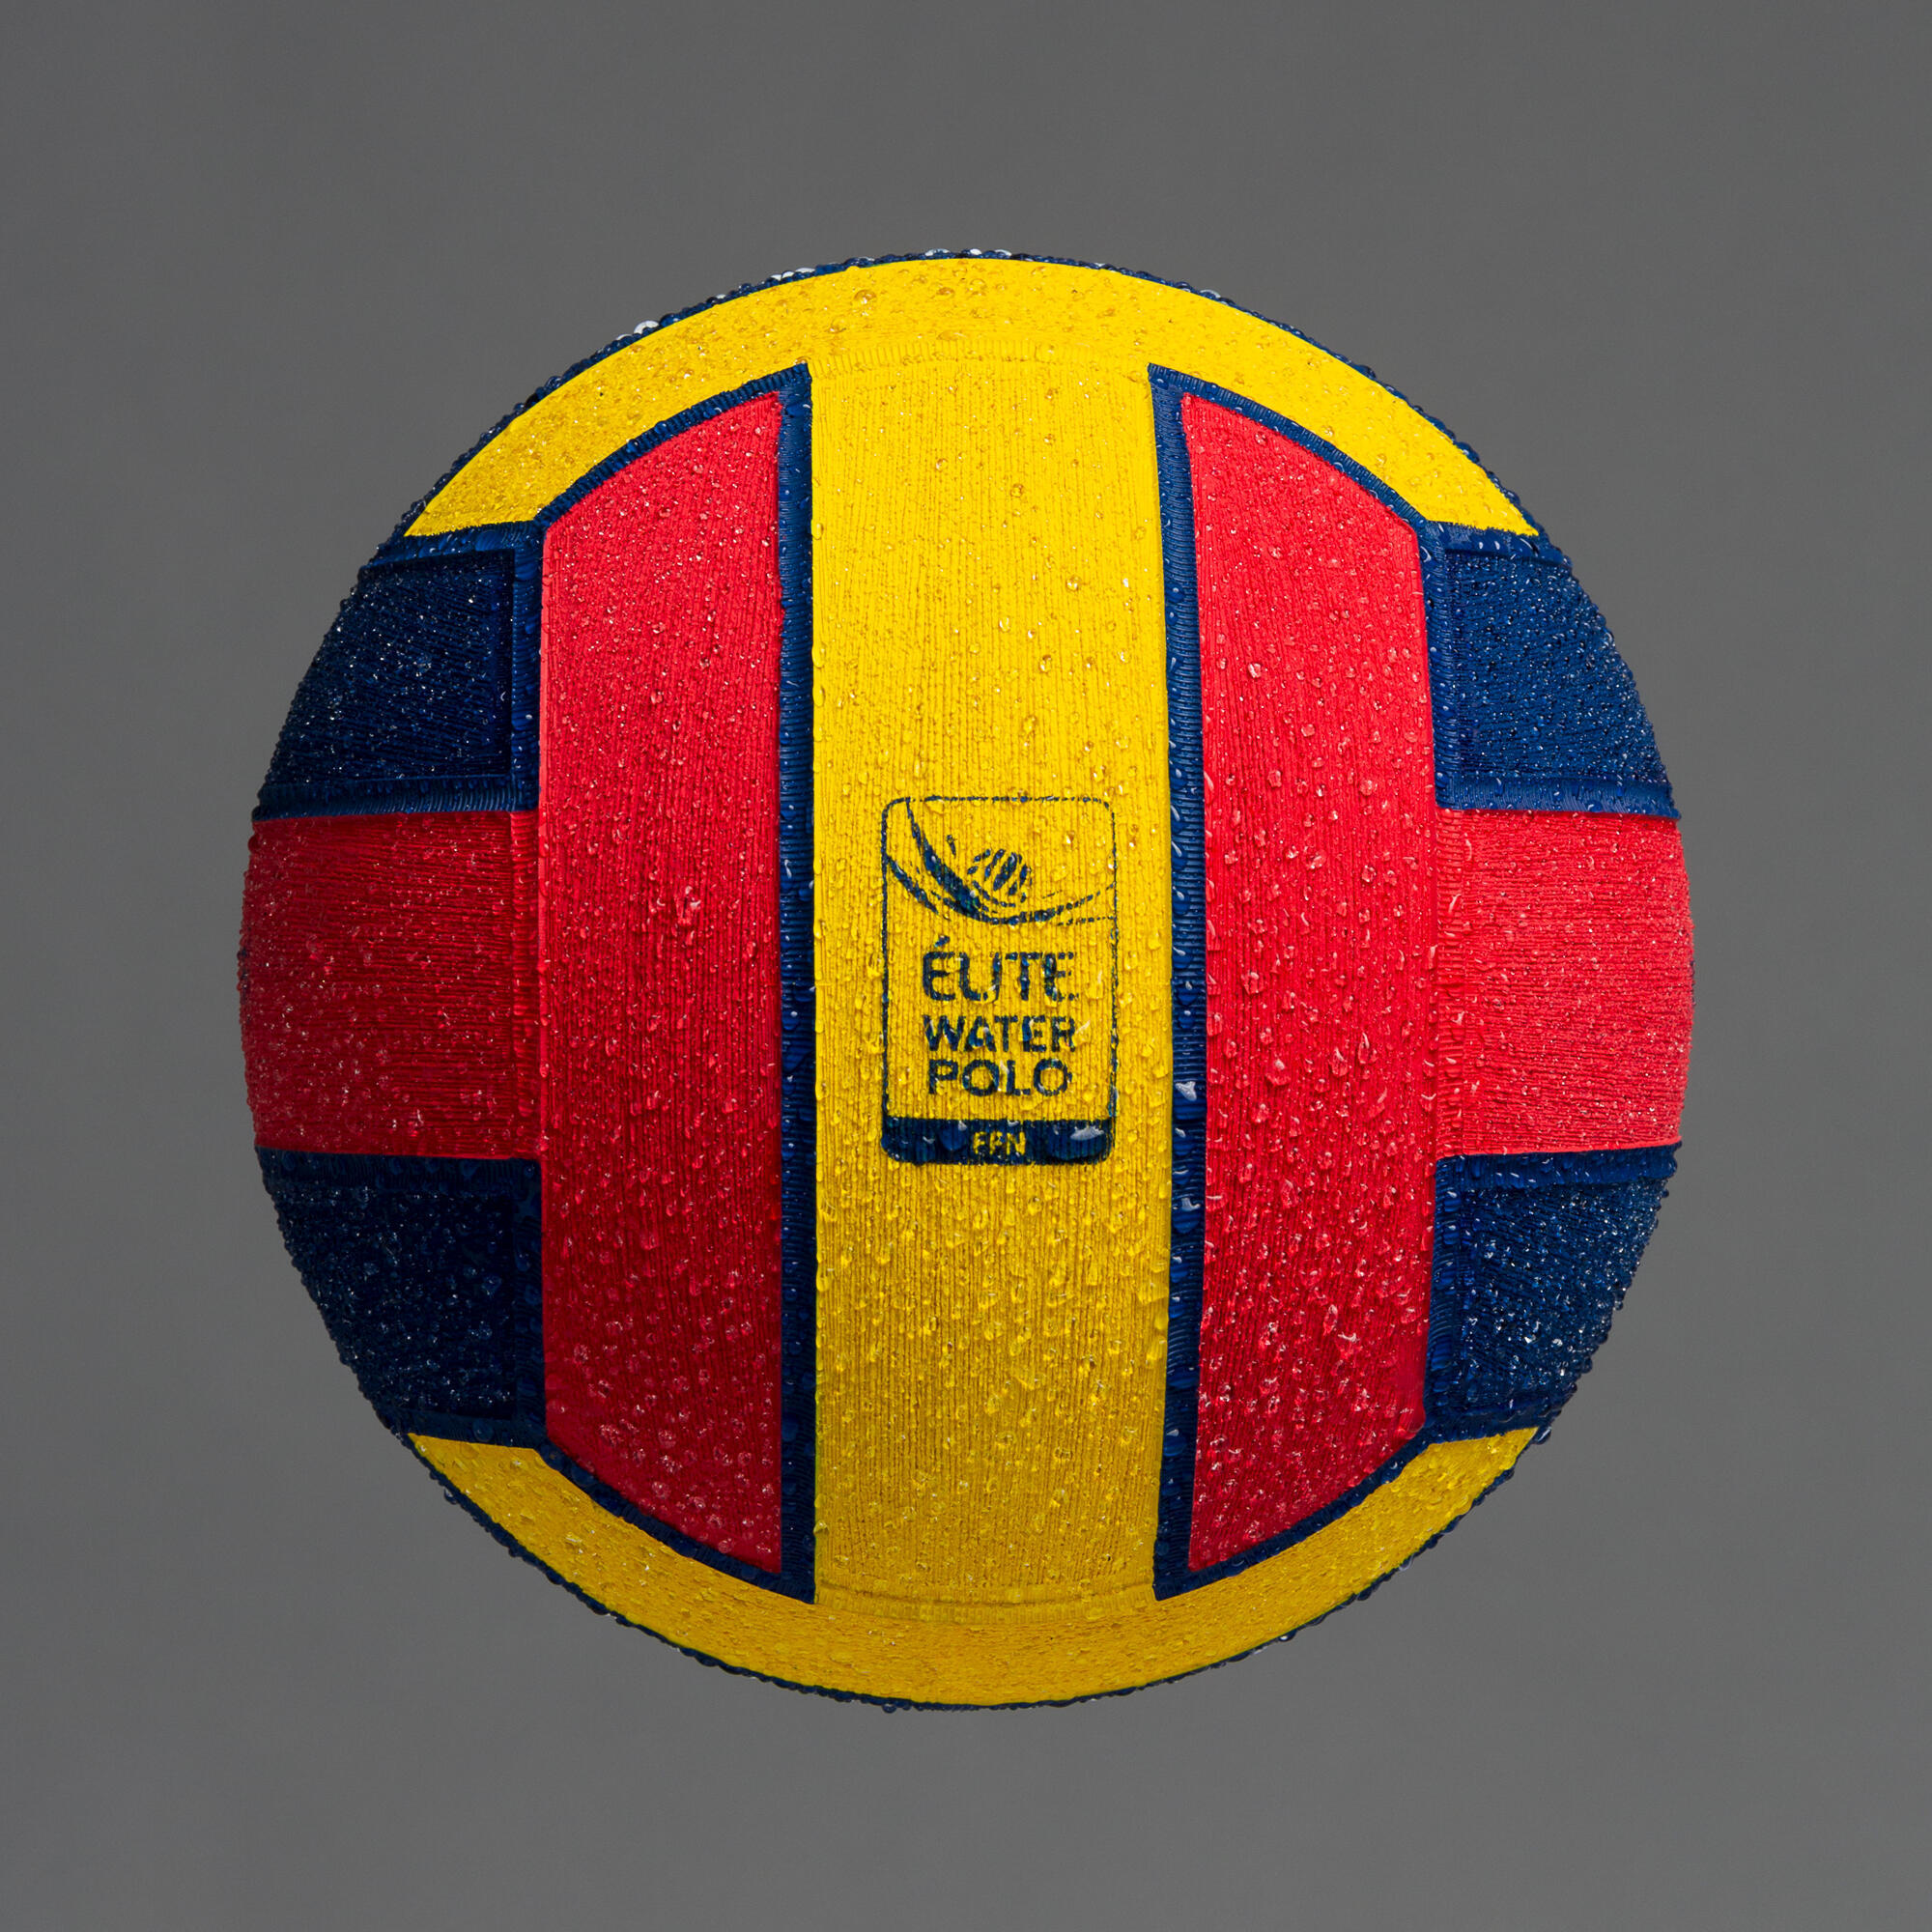 WATER POLO BALL WP900 SIZE 5 3/5